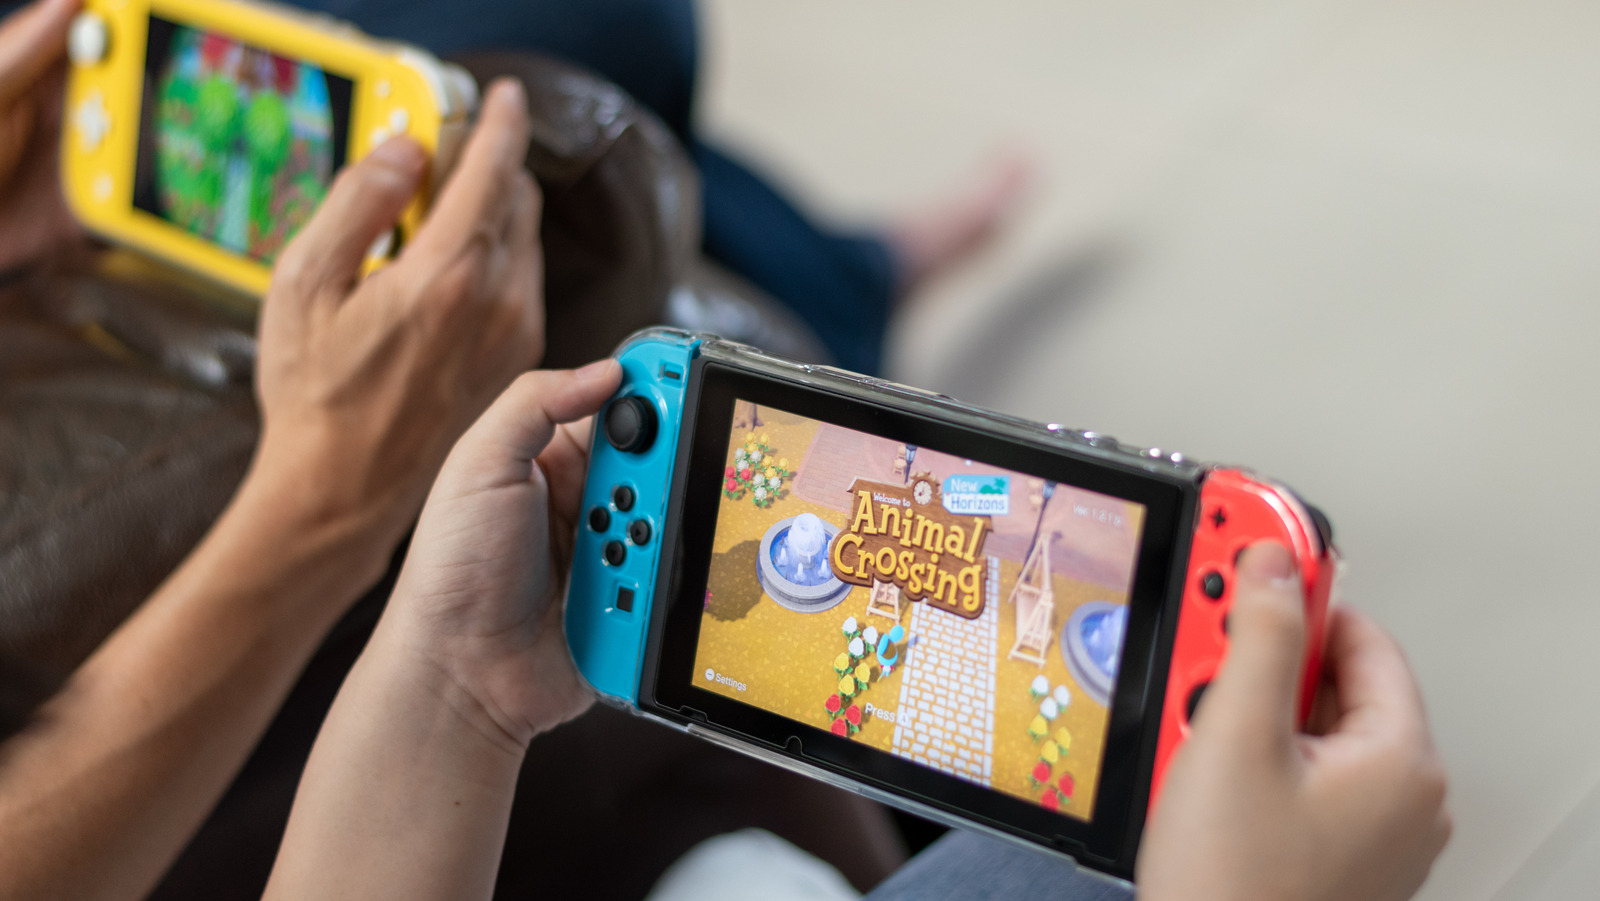 10 Things You Should Stop Doing On Your Nintendo Switch Immediately – SlashGear